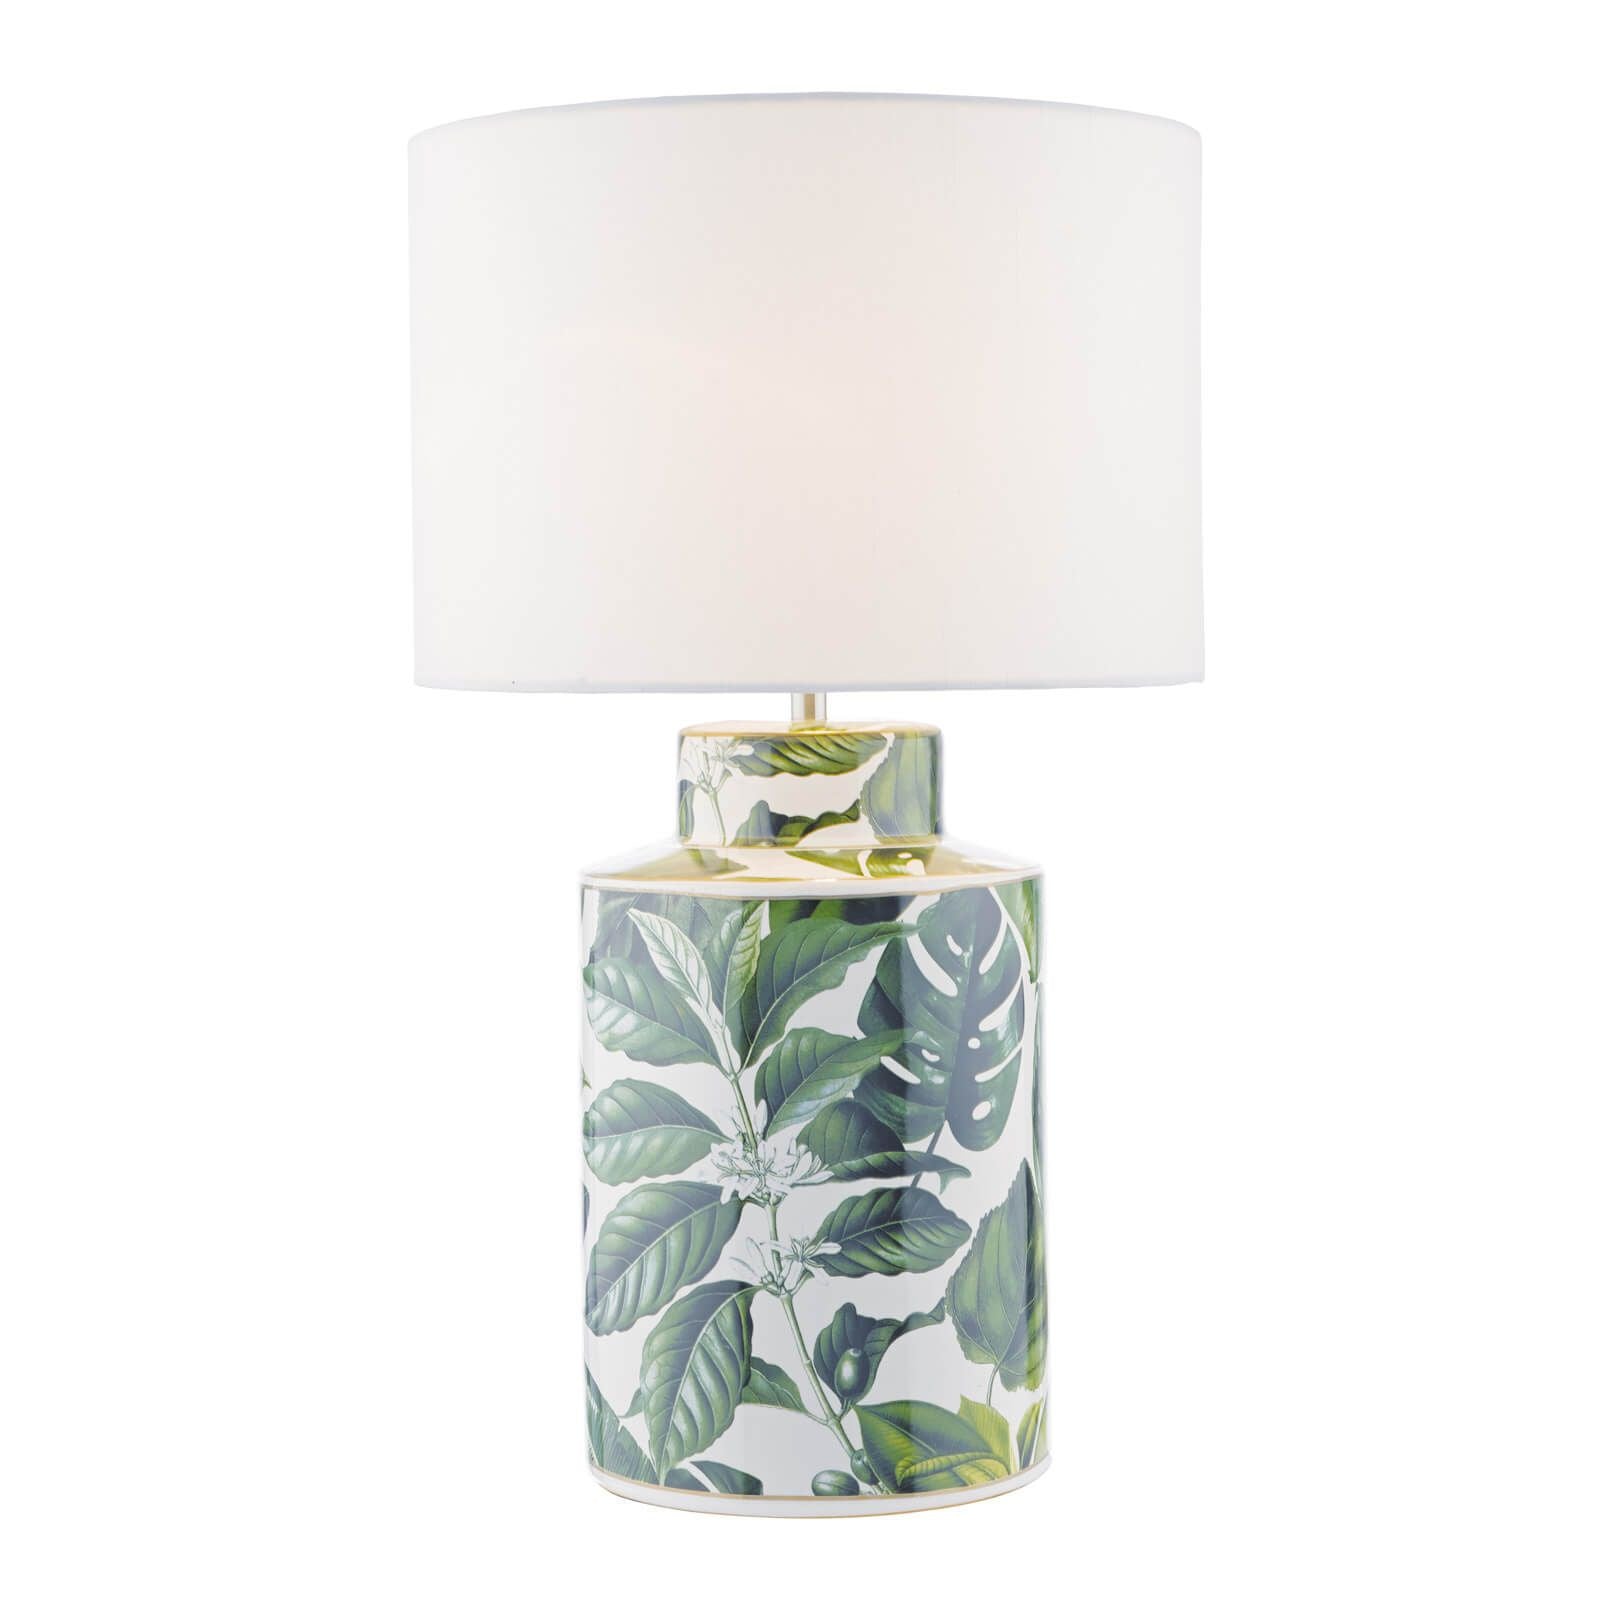 Filip Table Lamp Green Leaf Print With Ivory Shade